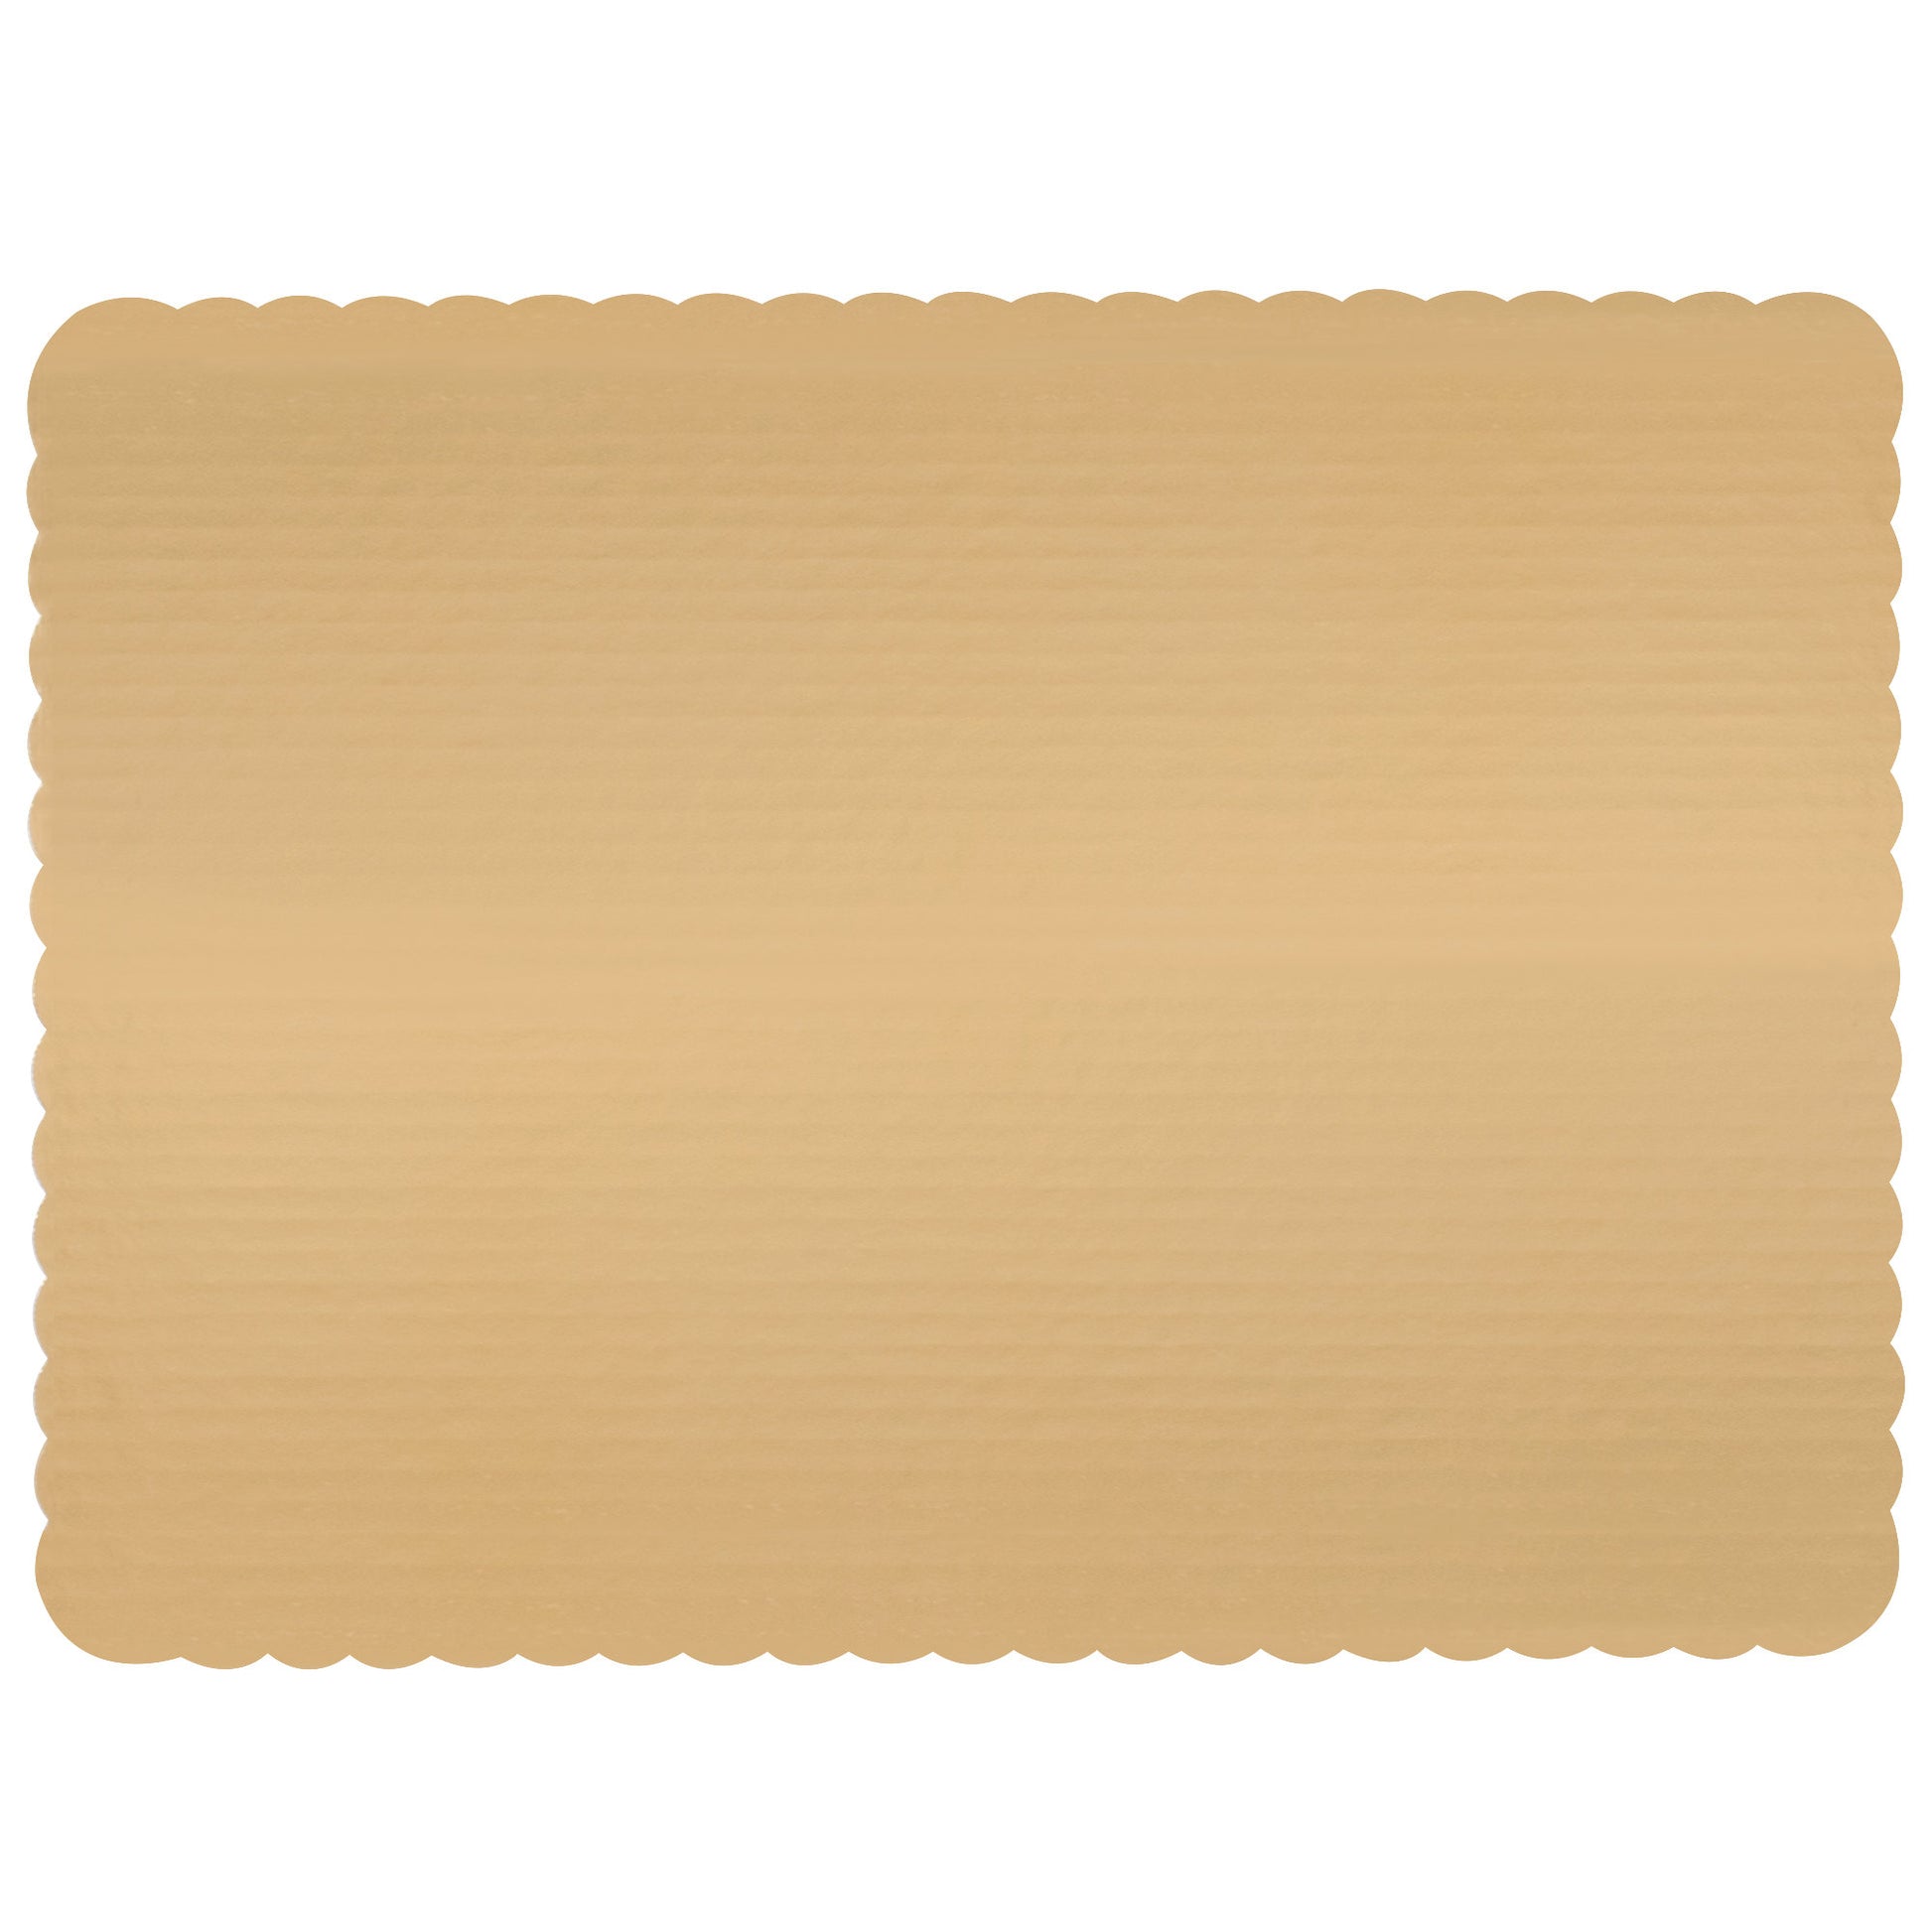 image shows a gold half sheet cake board with scalloped edges